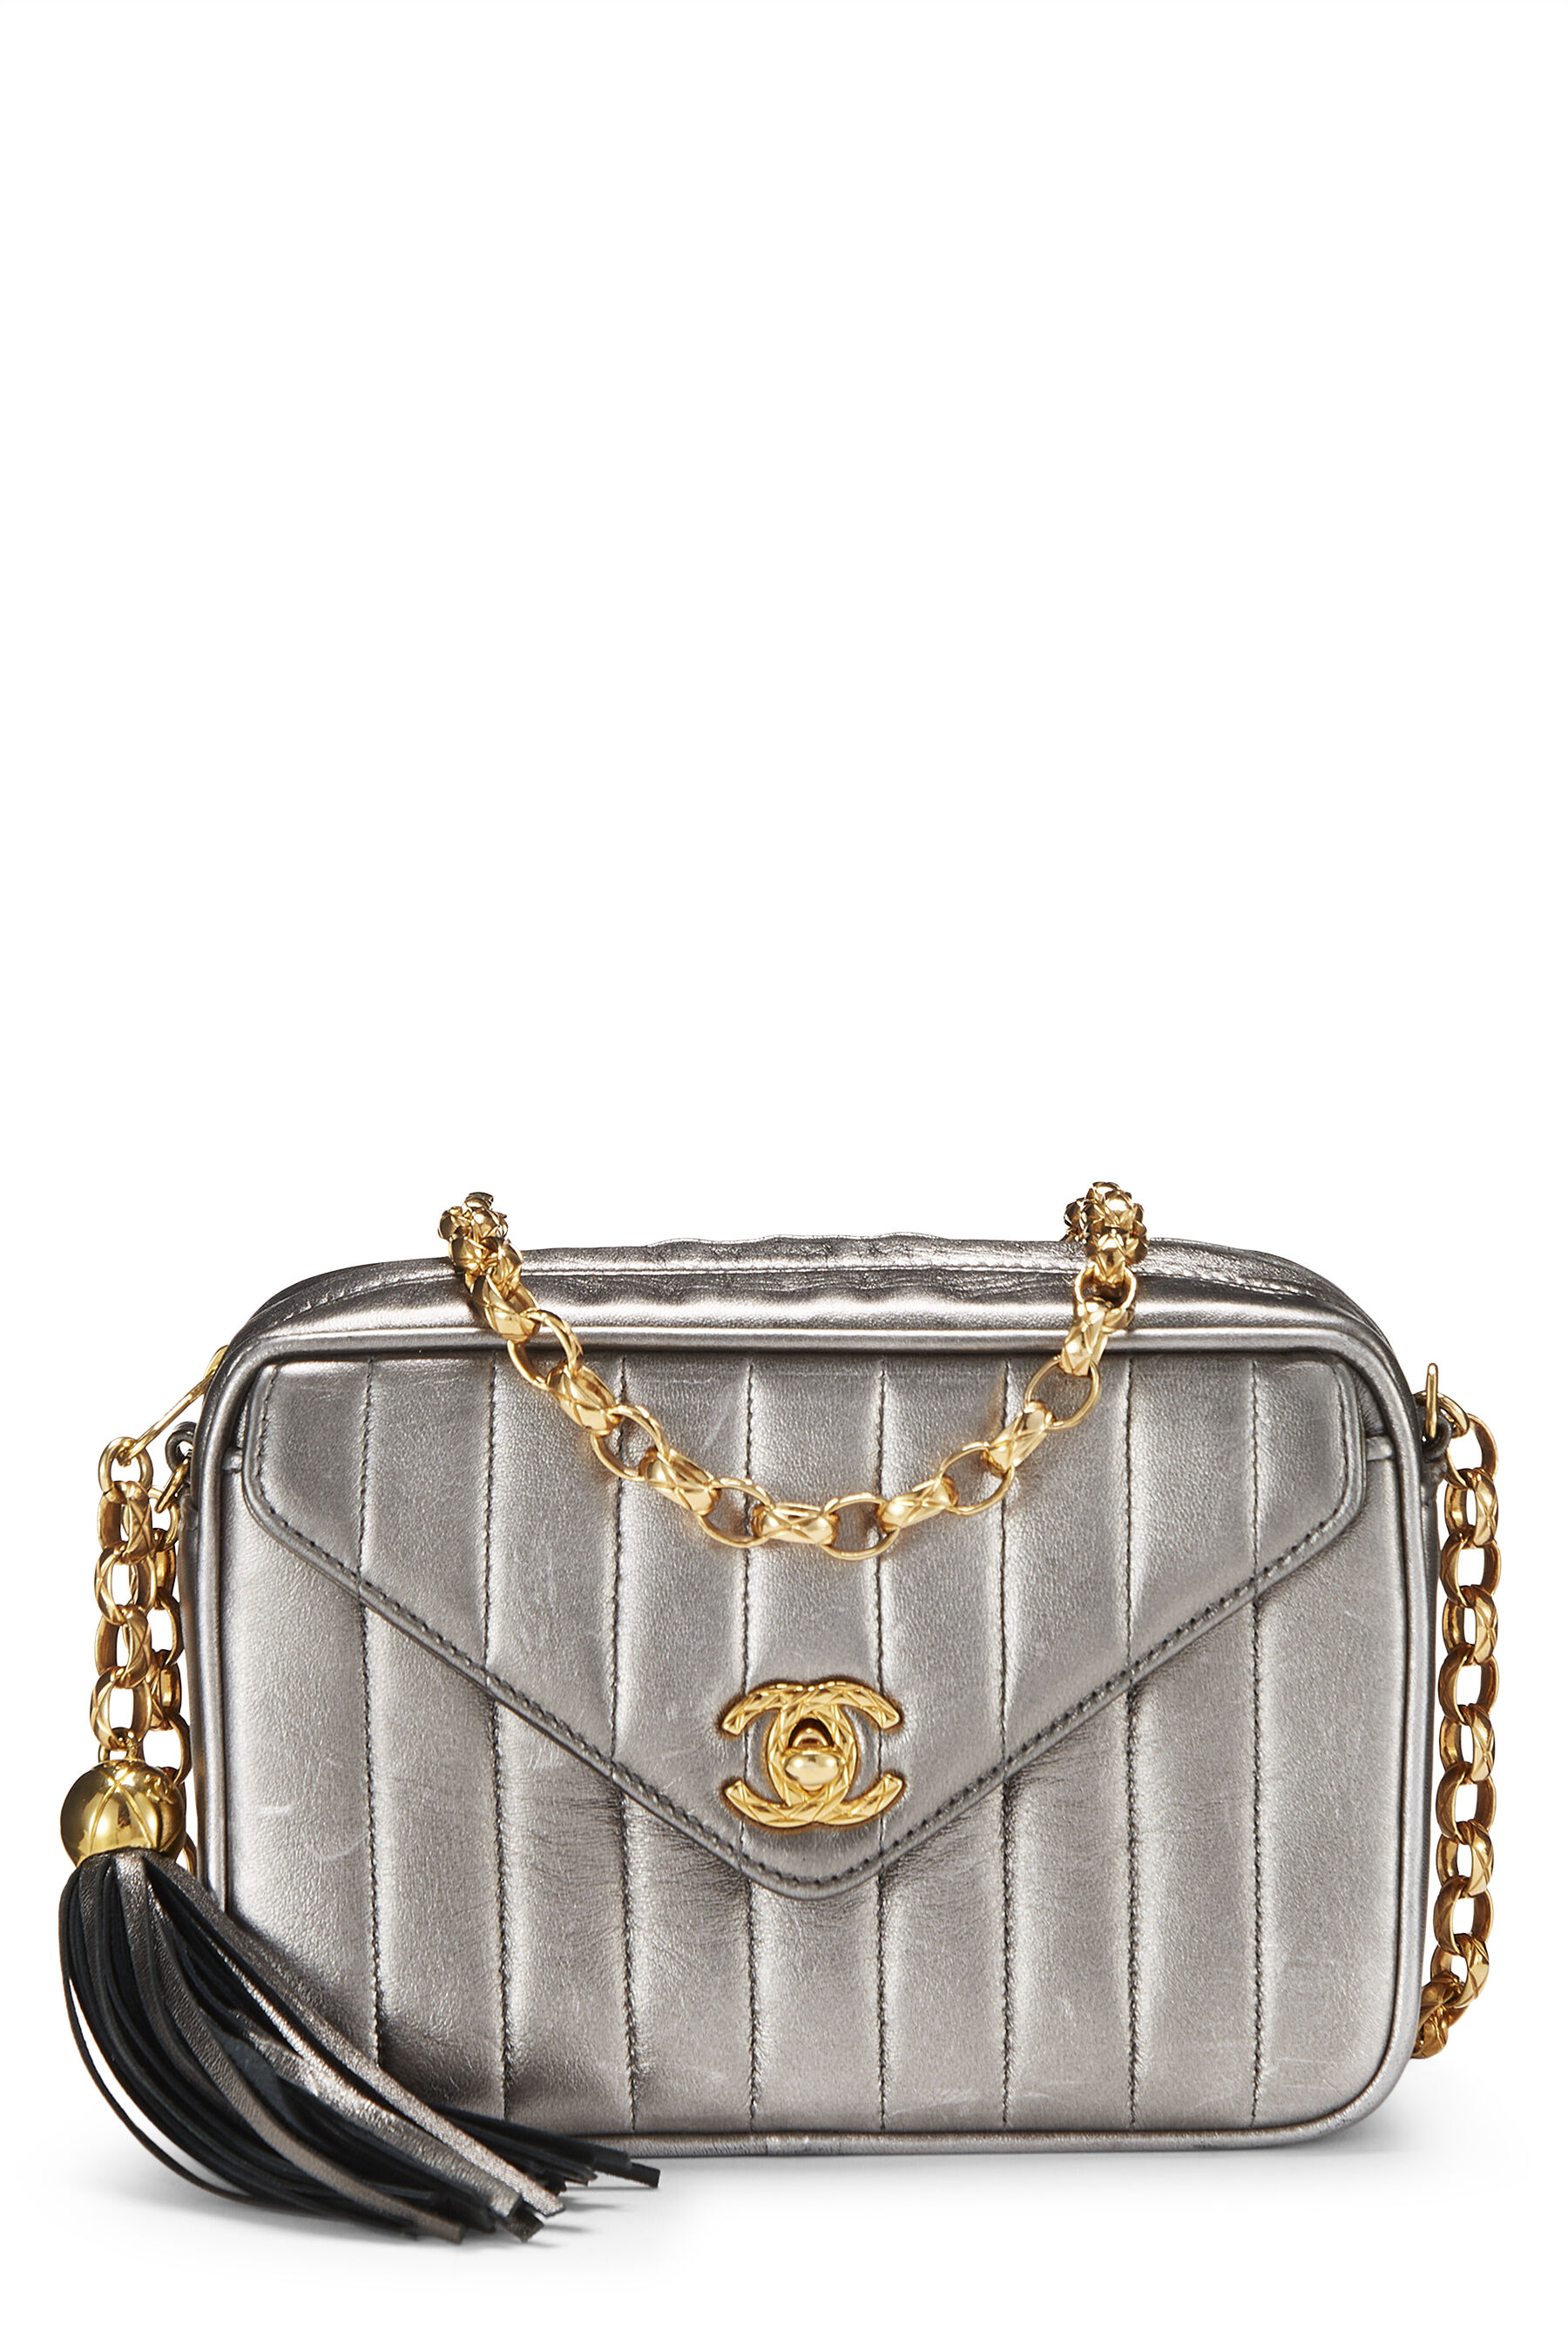 Chanel - Silver Quilted Lambskin Envelope Camera Bag Mini